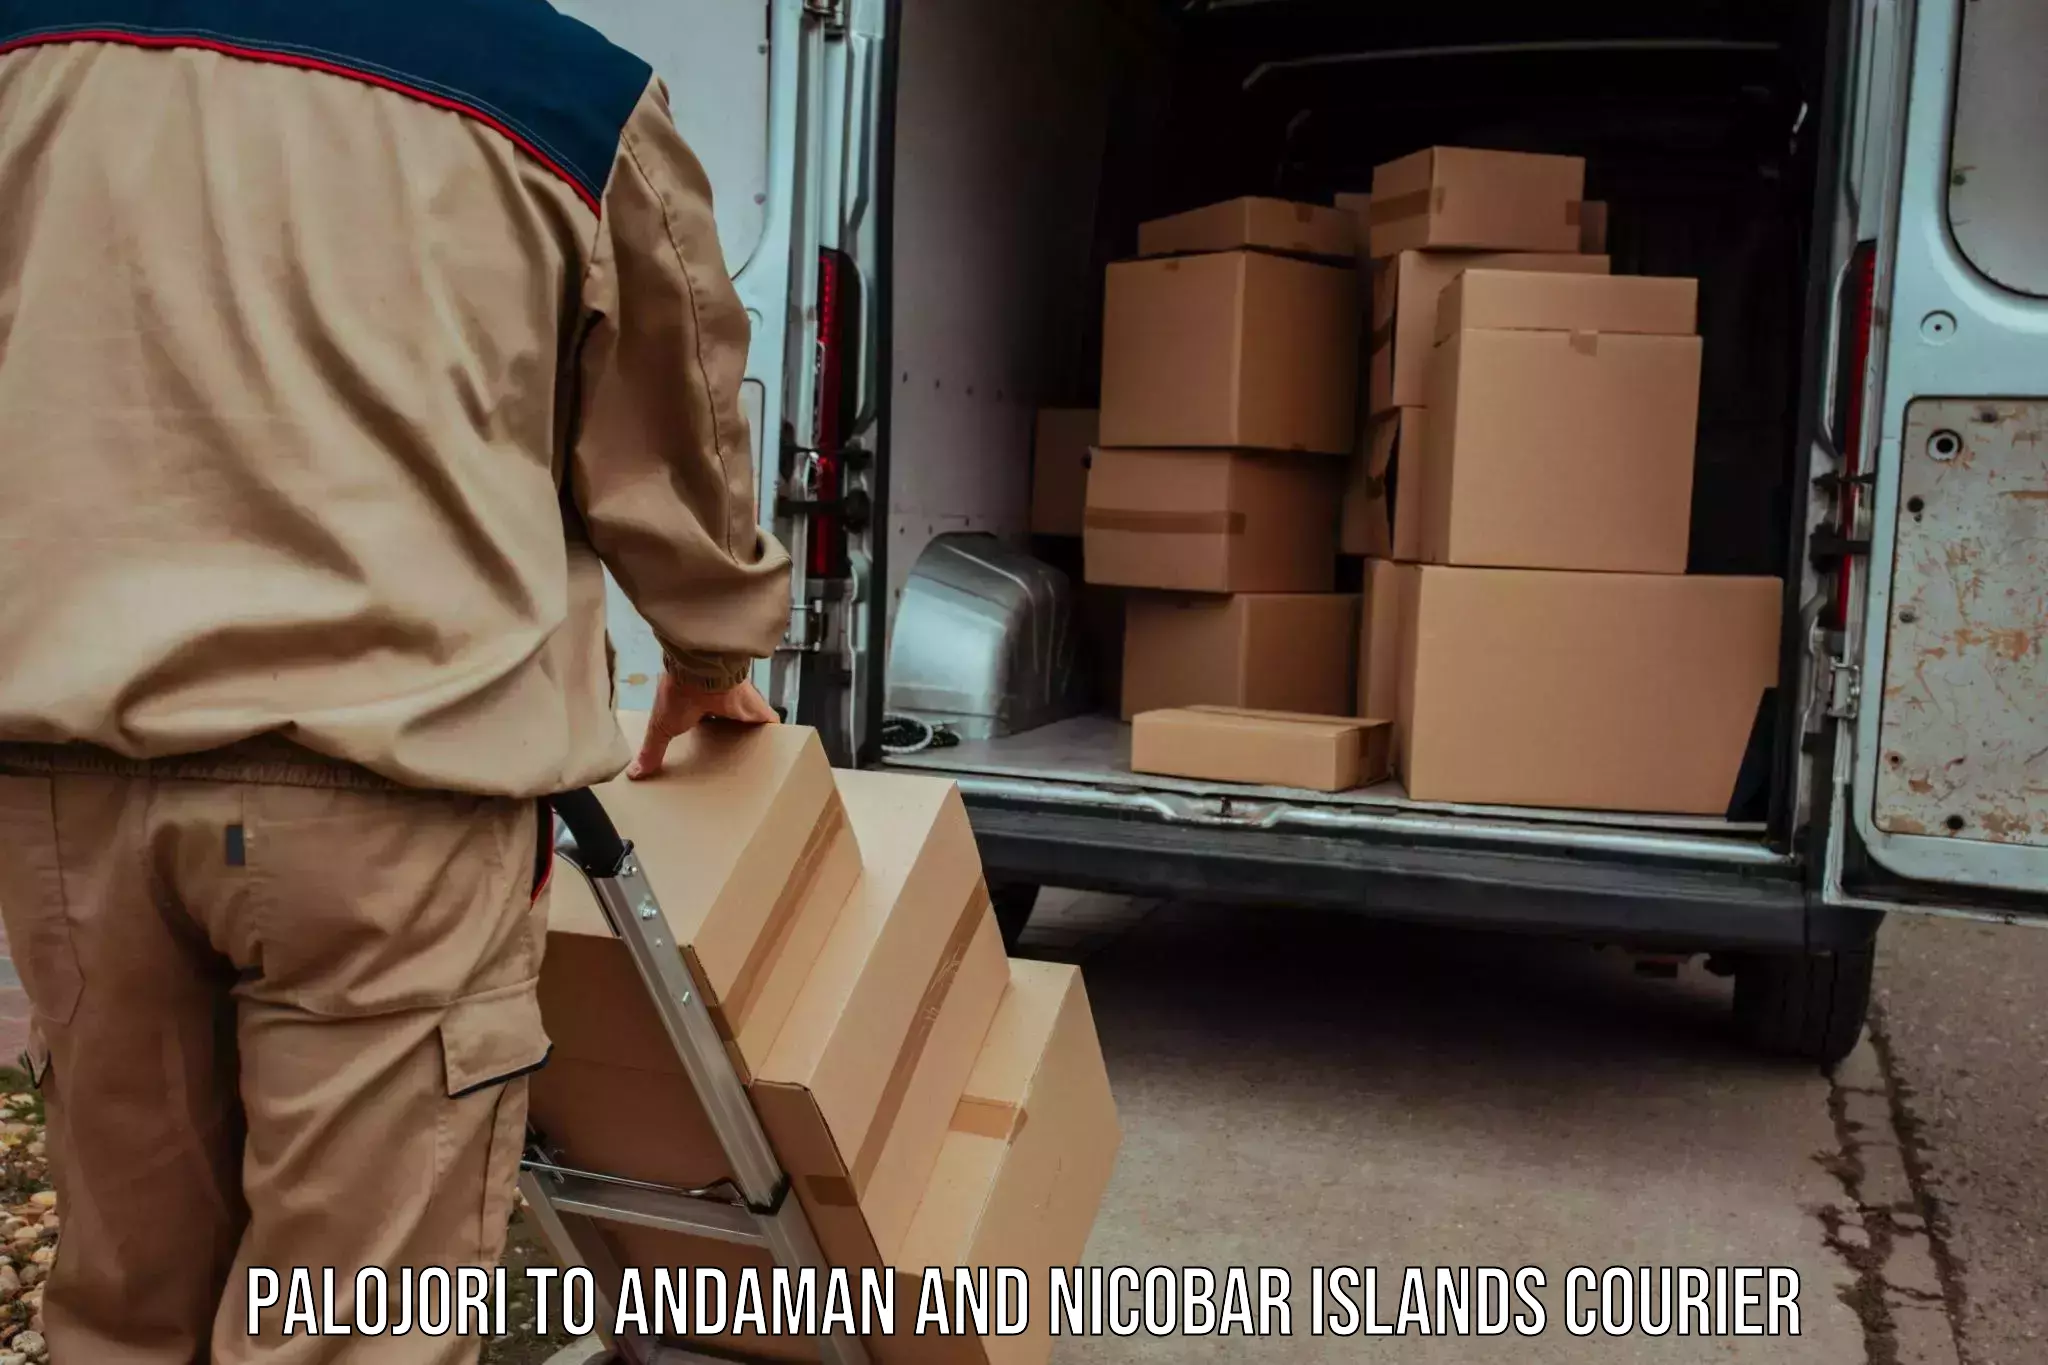 Courier service booking in Palojori to South Andaman